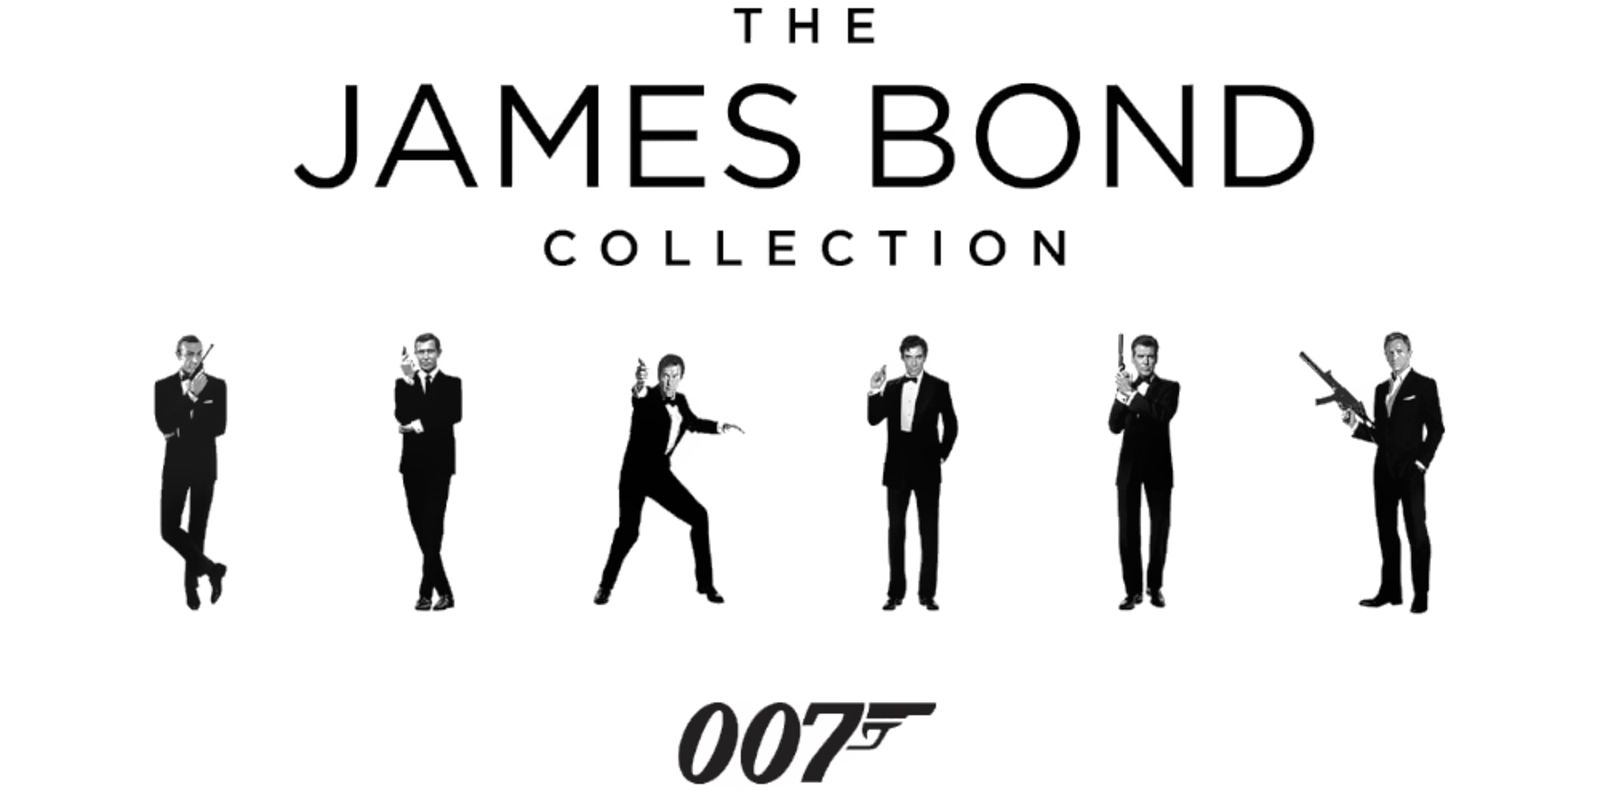 The James Bond Collection banner art